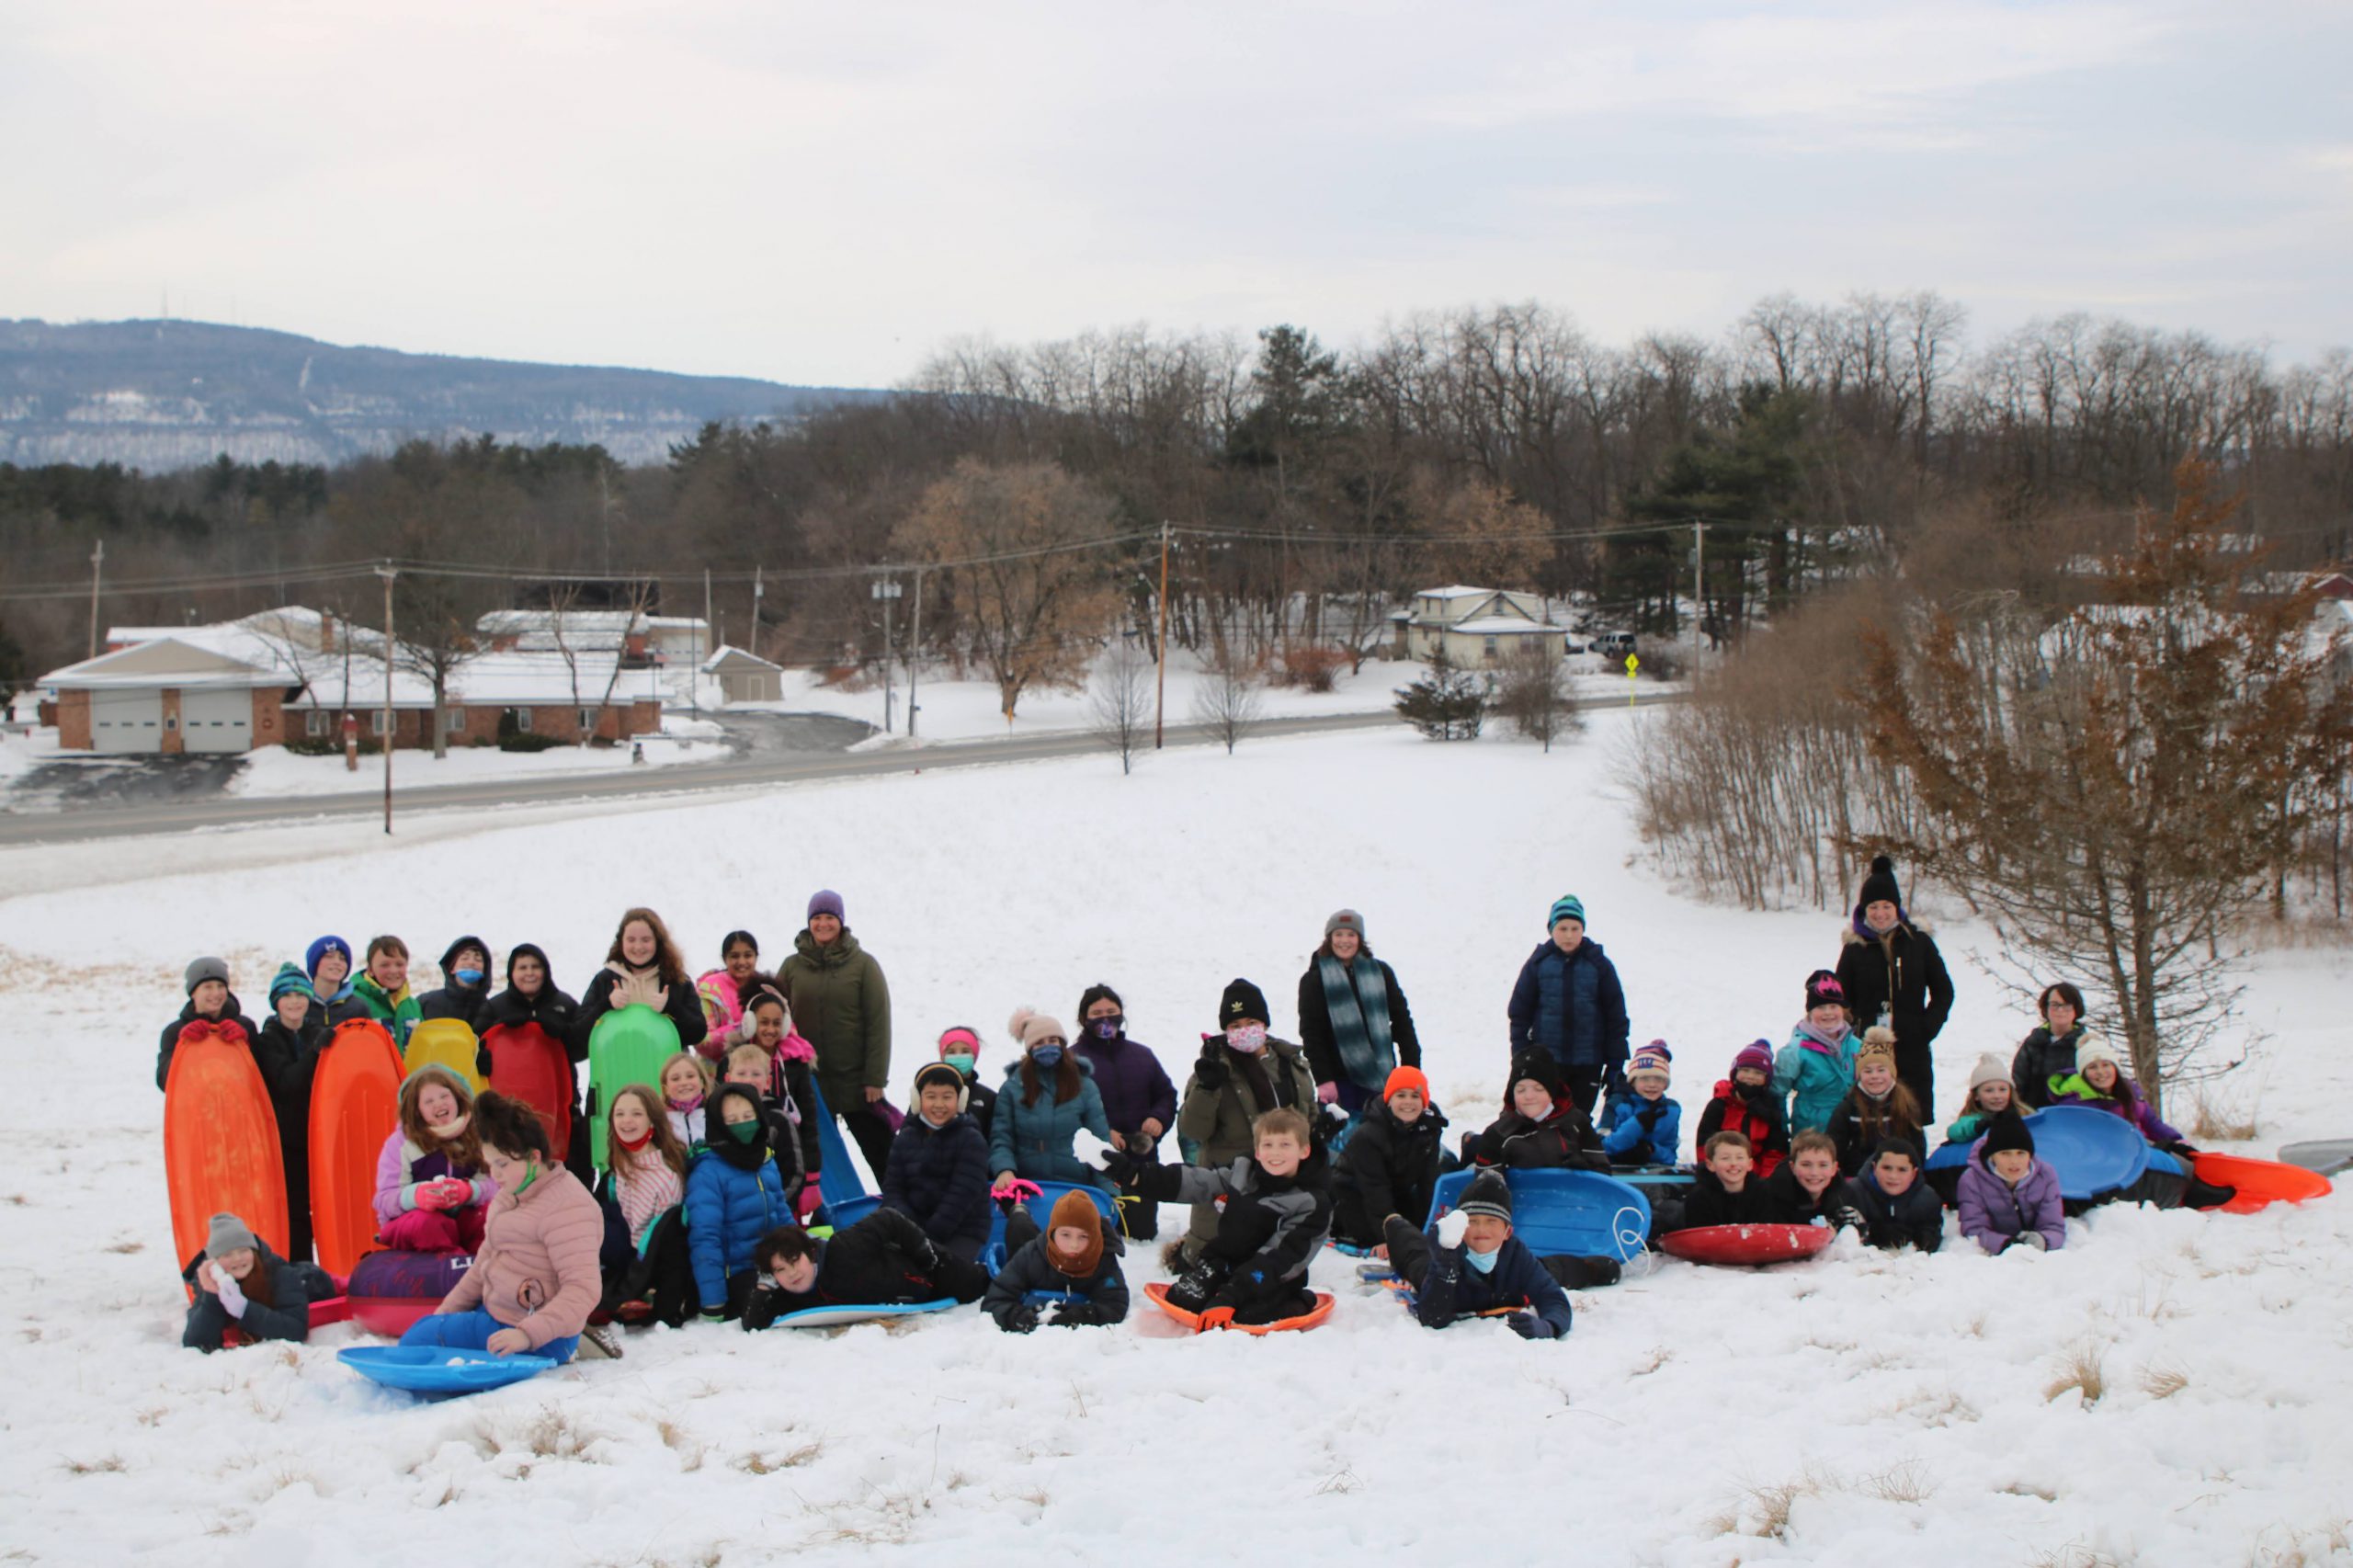 fifth grade class standing together outside in the snow. All are wearing snow gear and some have sleds and tubes.